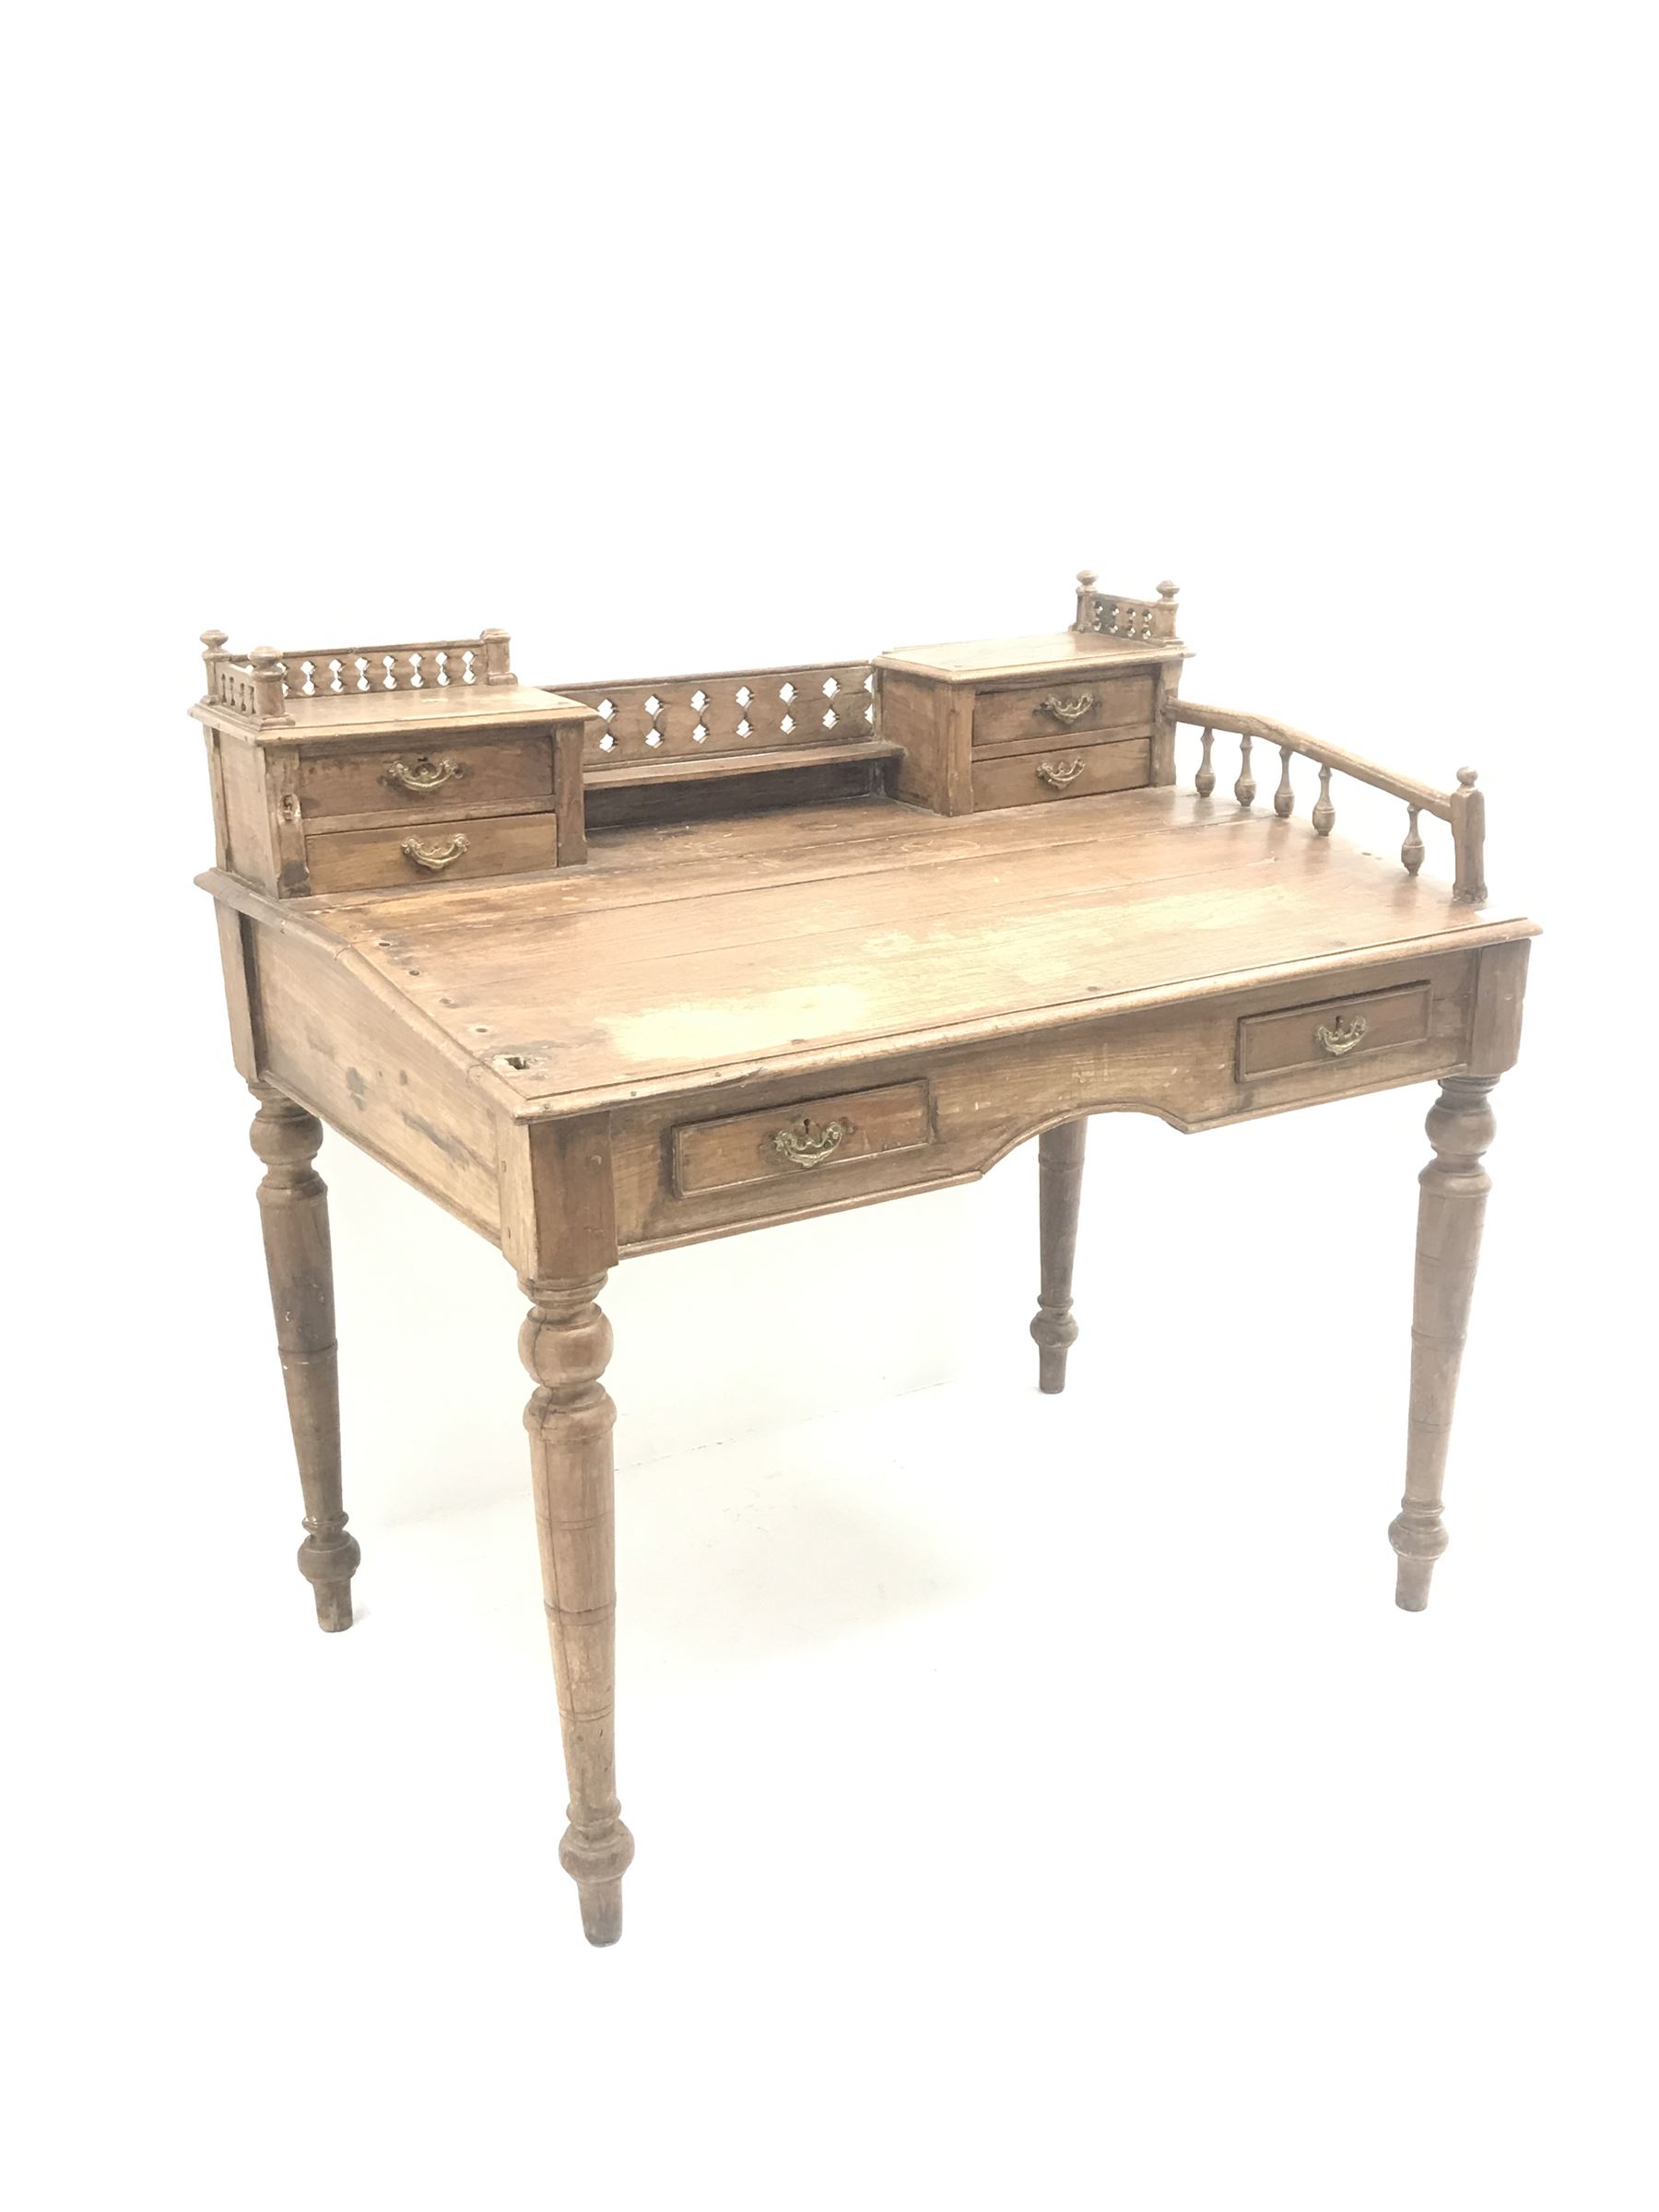 Eastern hardwood clerks desk, raised back with pierced gallery, four small drawers above sloping fro